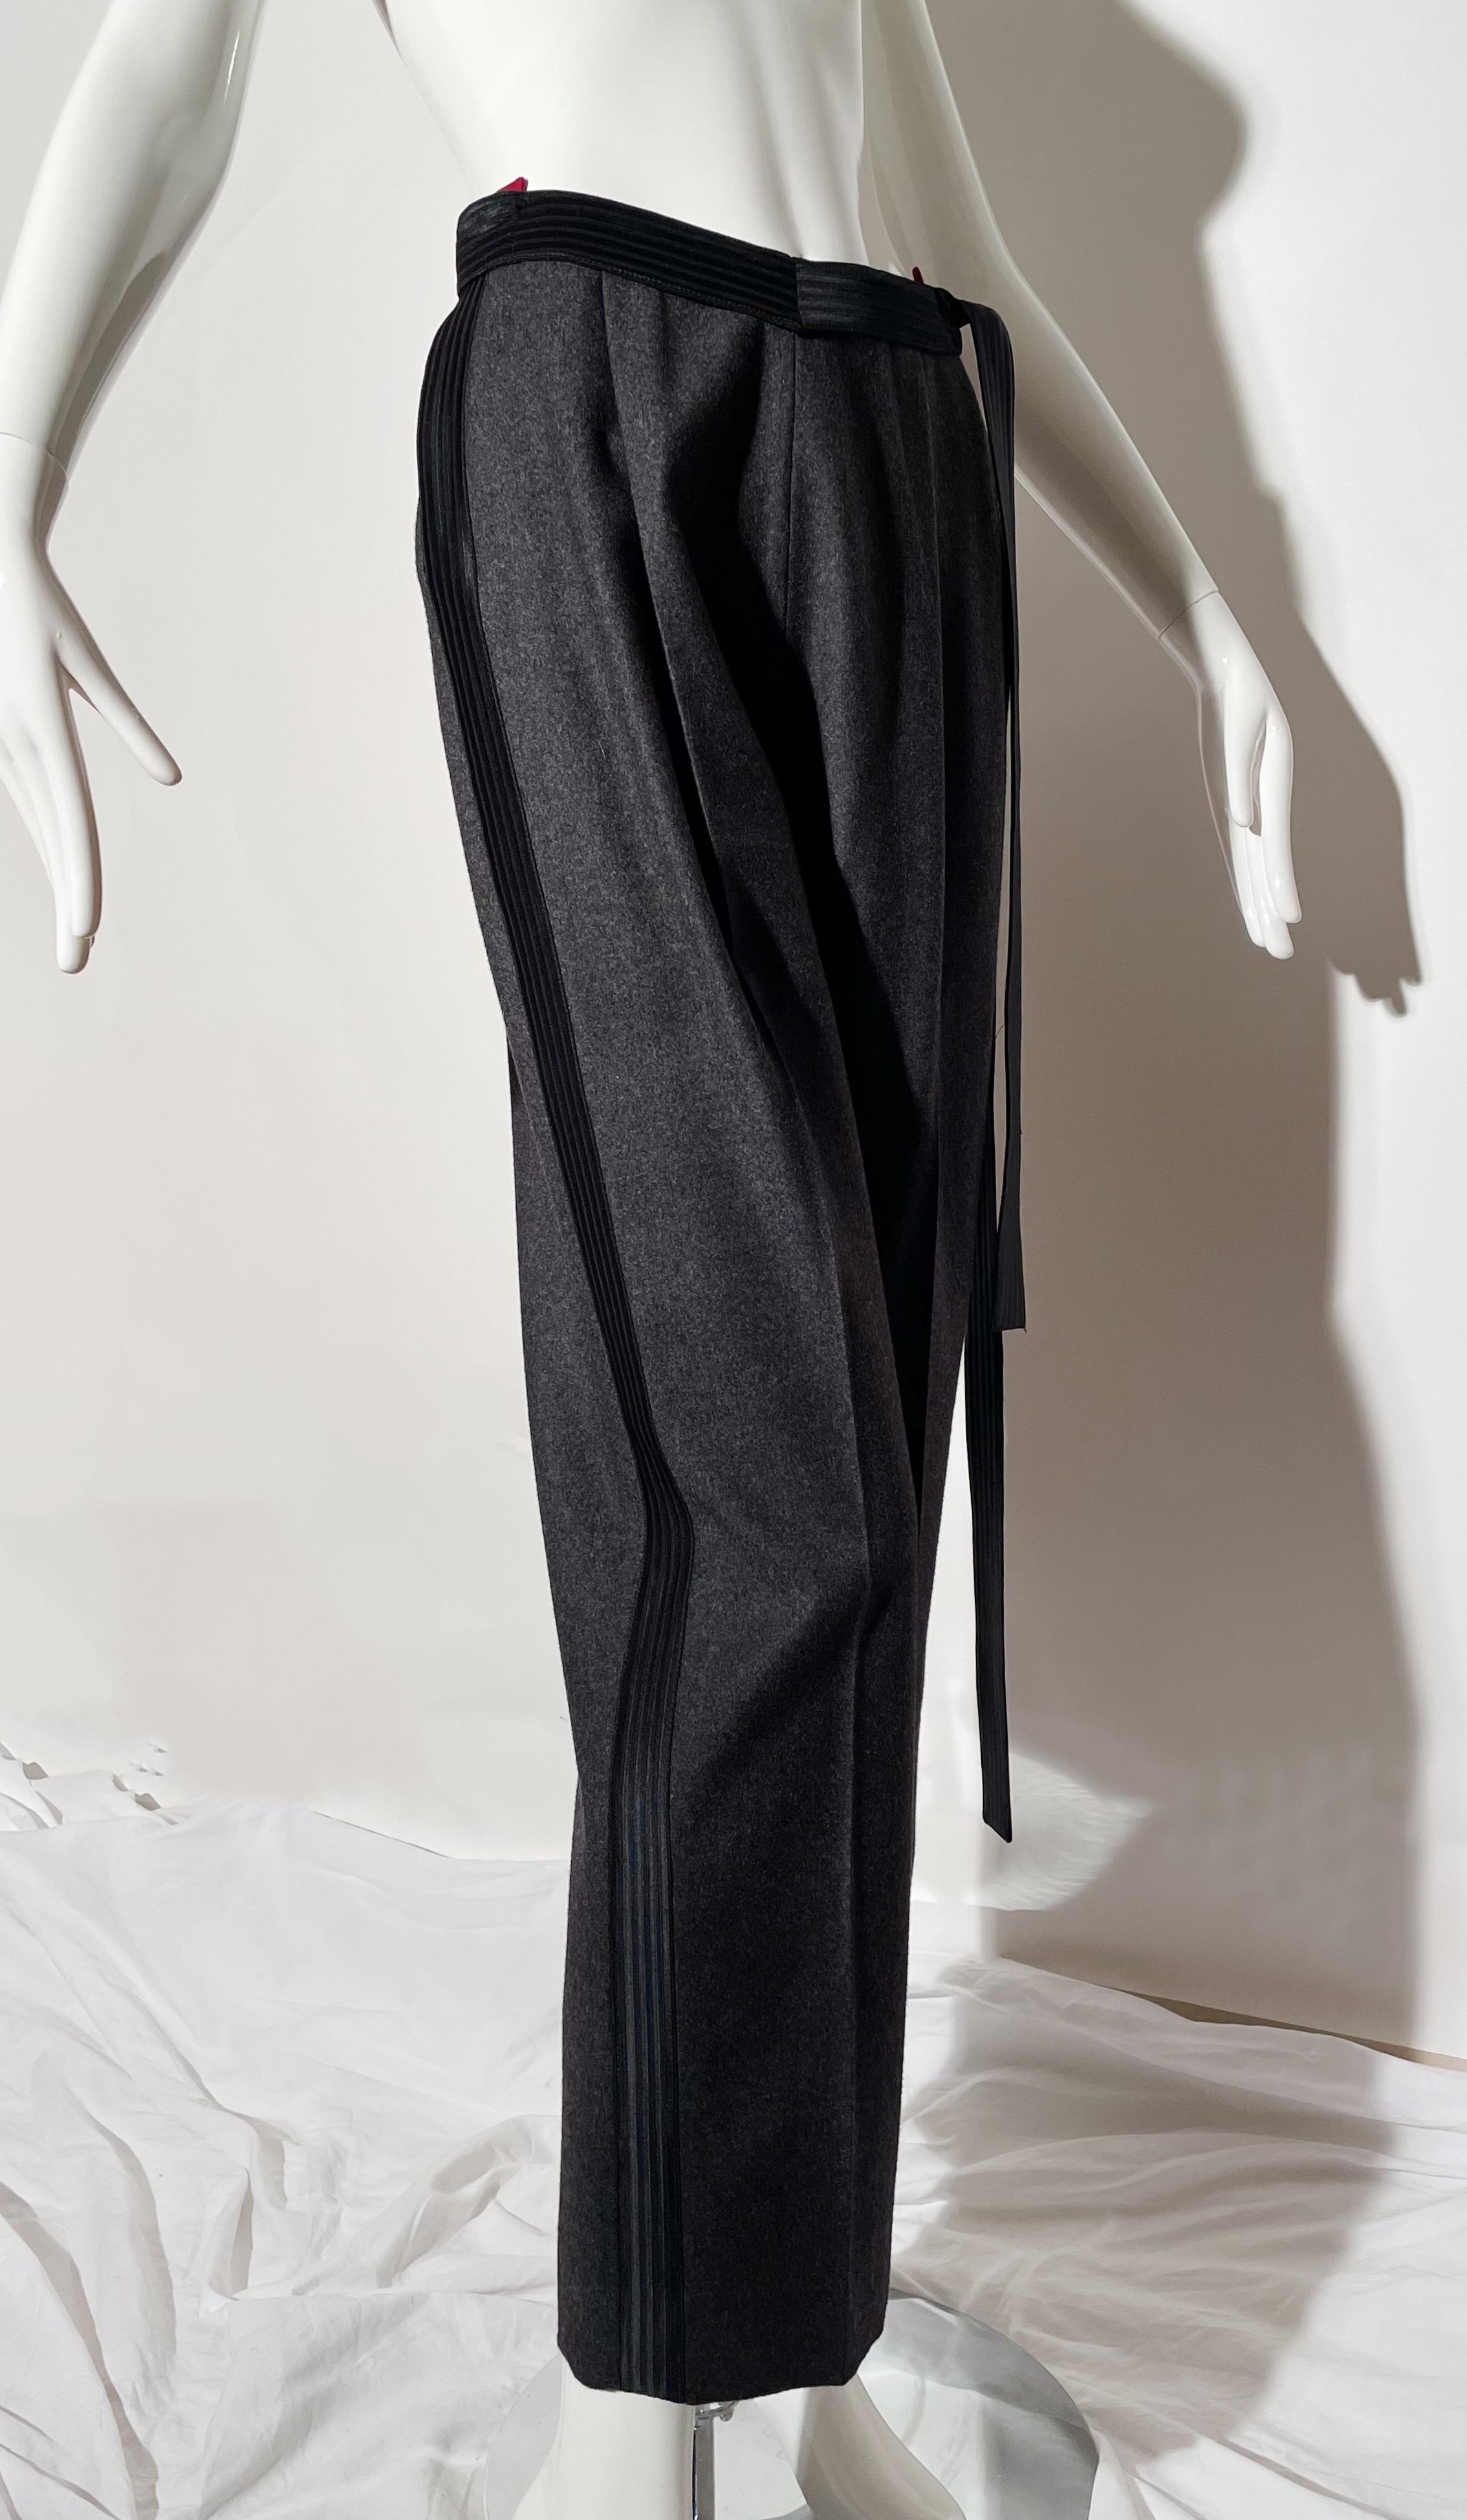 Gianfranco Ferre Tuxedo Trousers In Excellent Condition For Sale In Waterford, MI